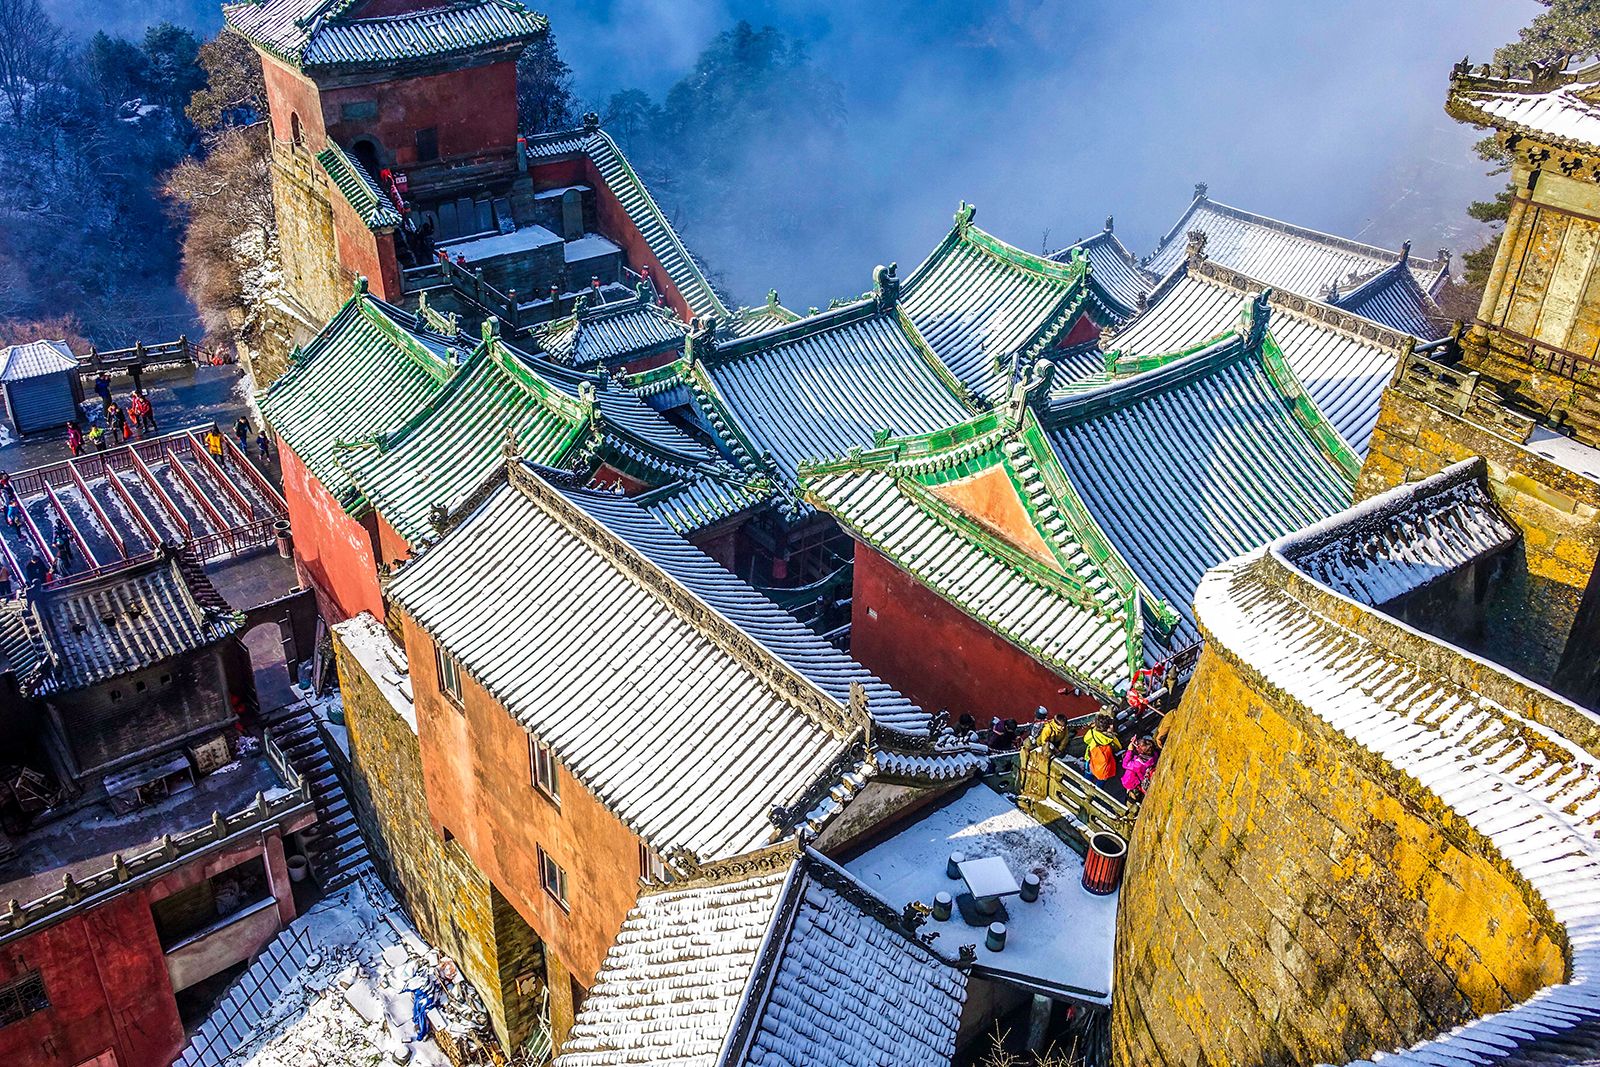 Ancient buildings are seen covered in snow in the Wudang Mountains, Hubei Province, China on March 26, 2016. /IC